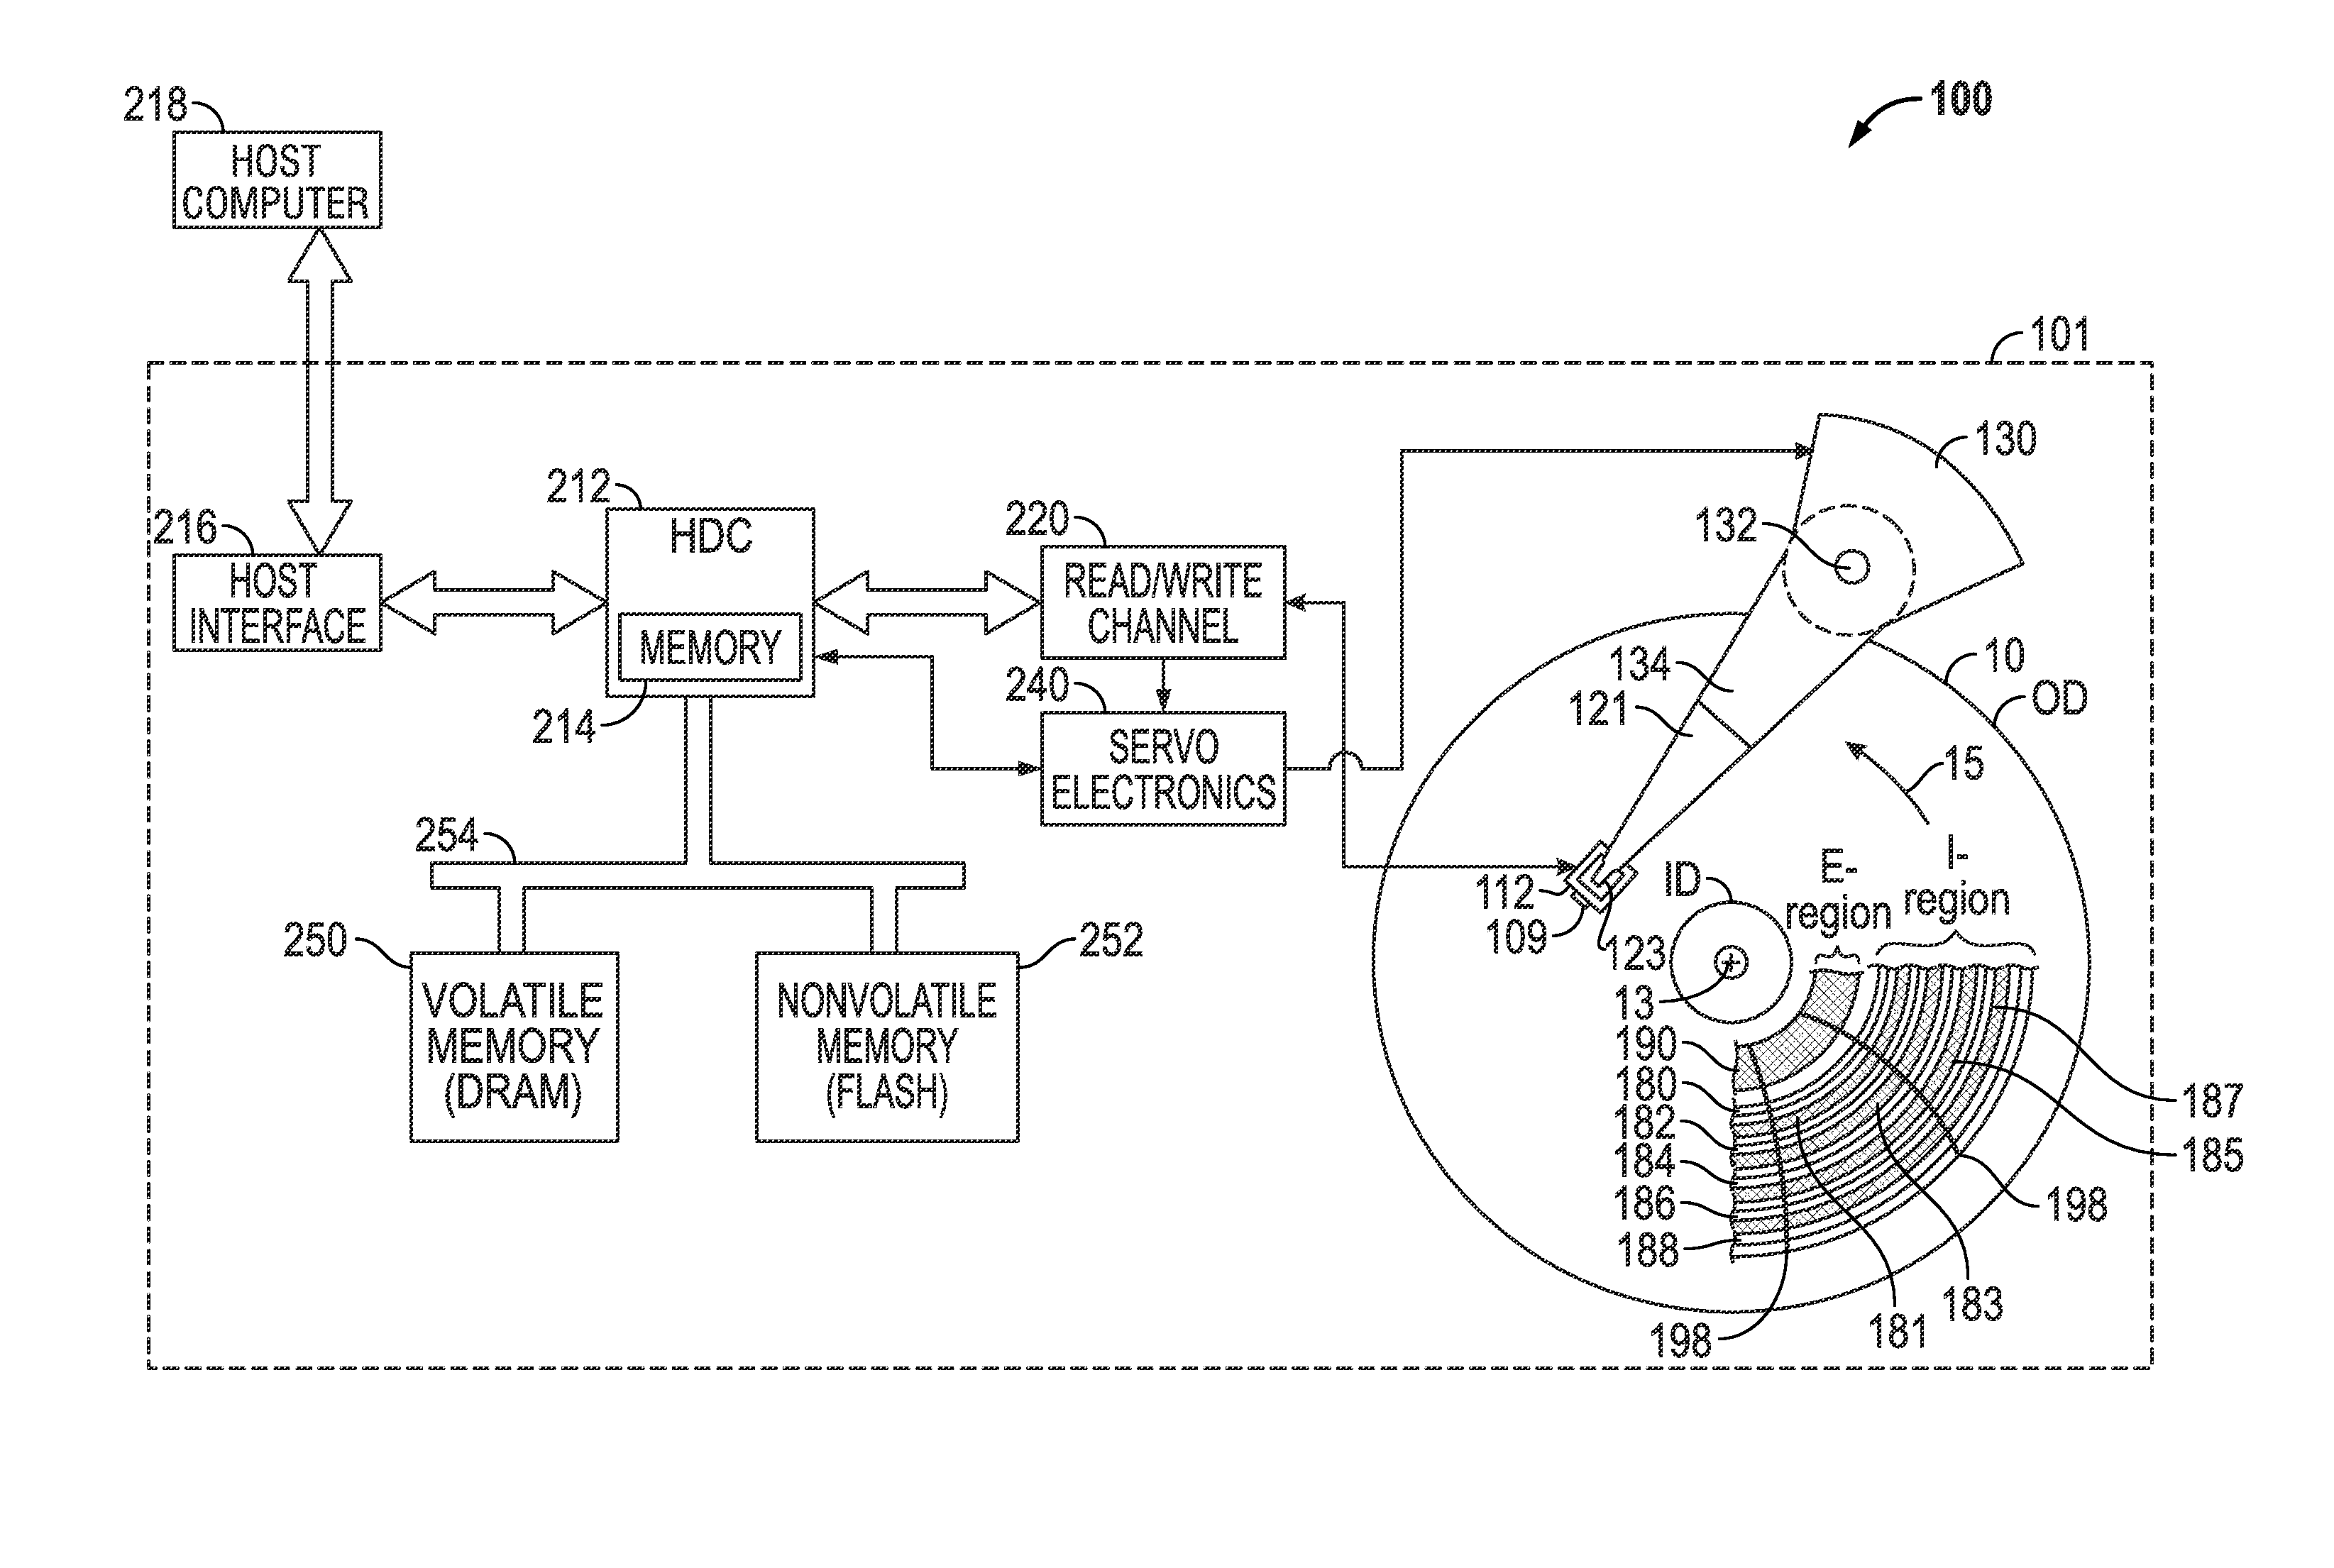 Shingled magnetic recording disk drive with multiple data zones containing different numbers of error-correction-code sectors